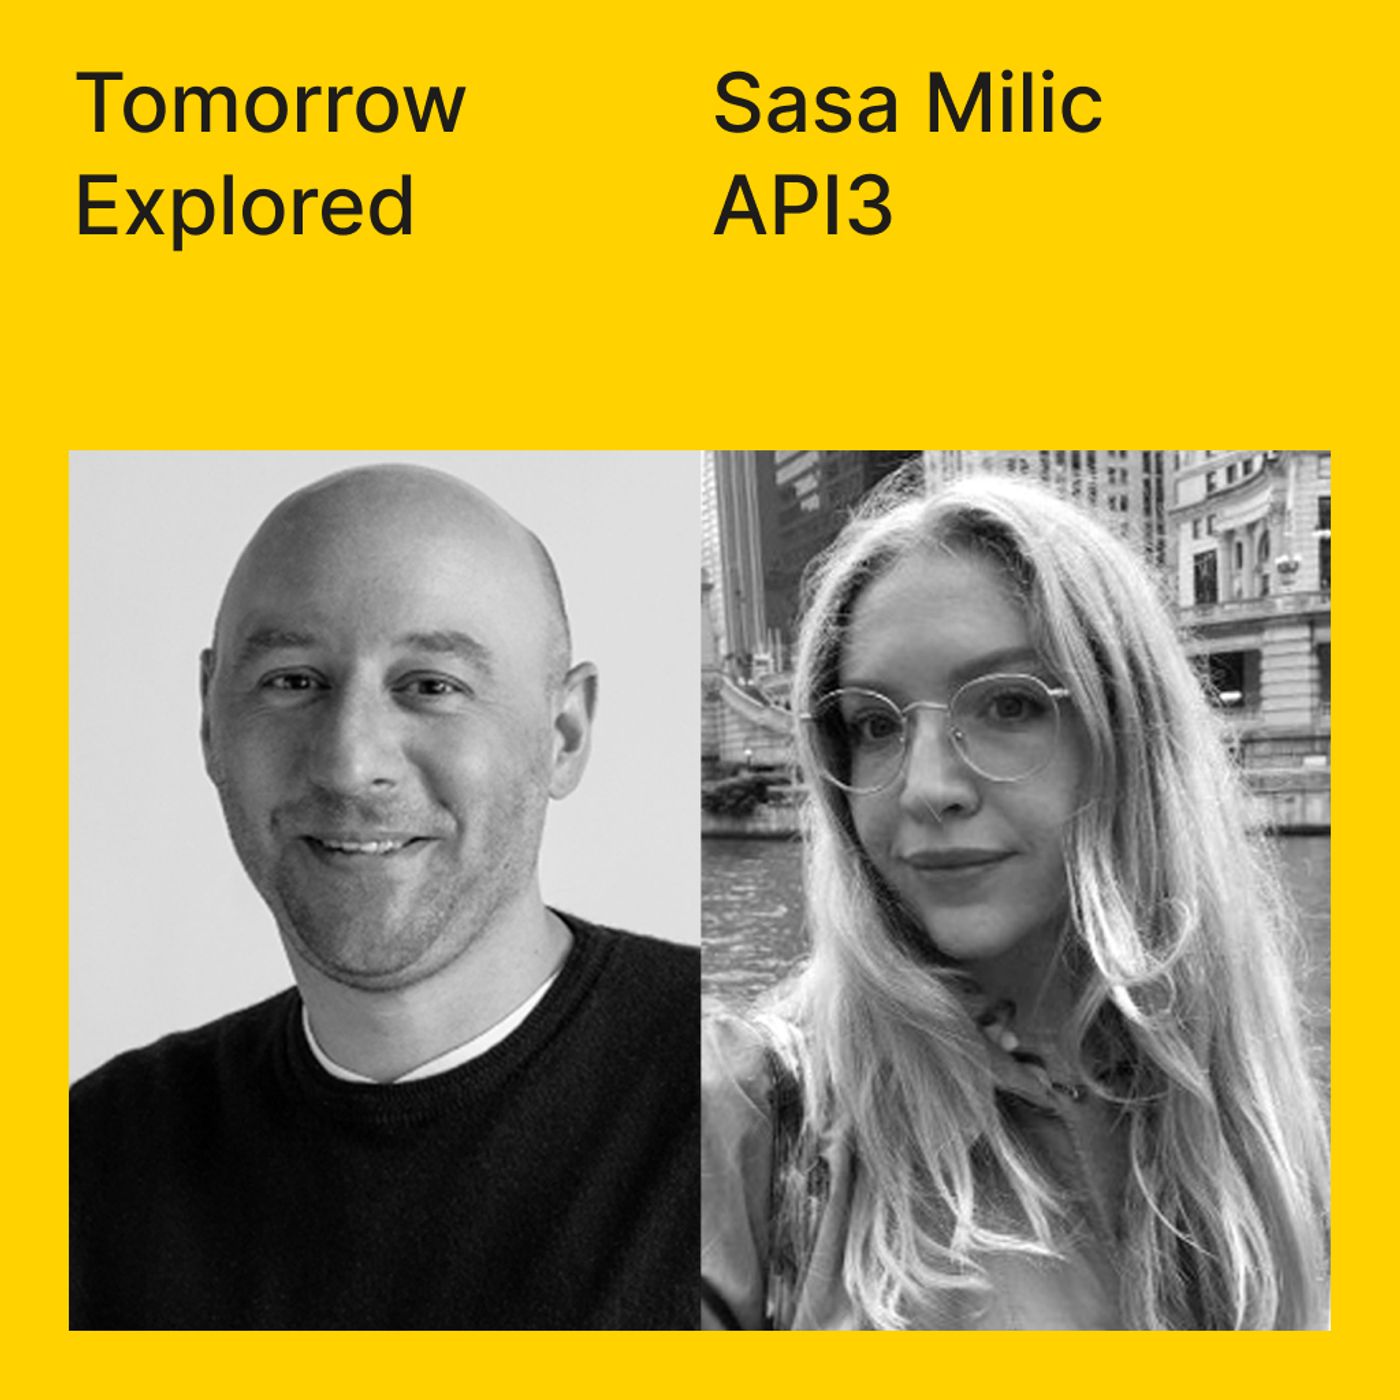 API3 and the DAO-governed model, with Sasa Milic